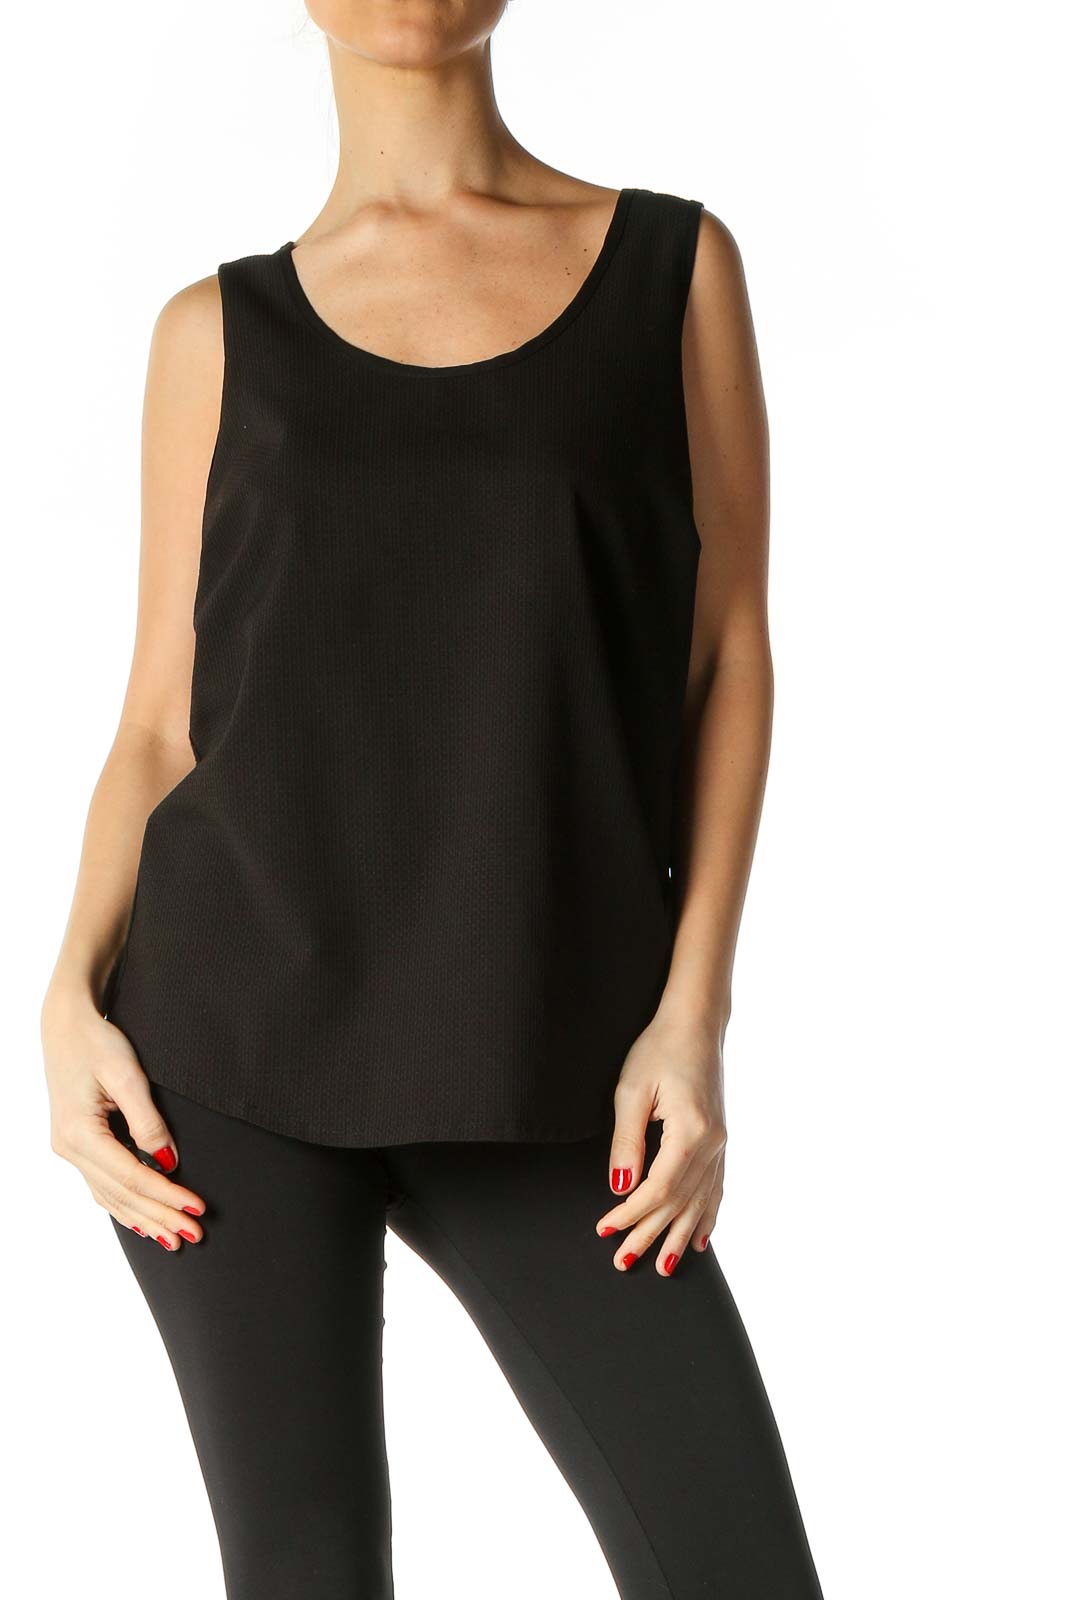 Black Solid Tank Top Front